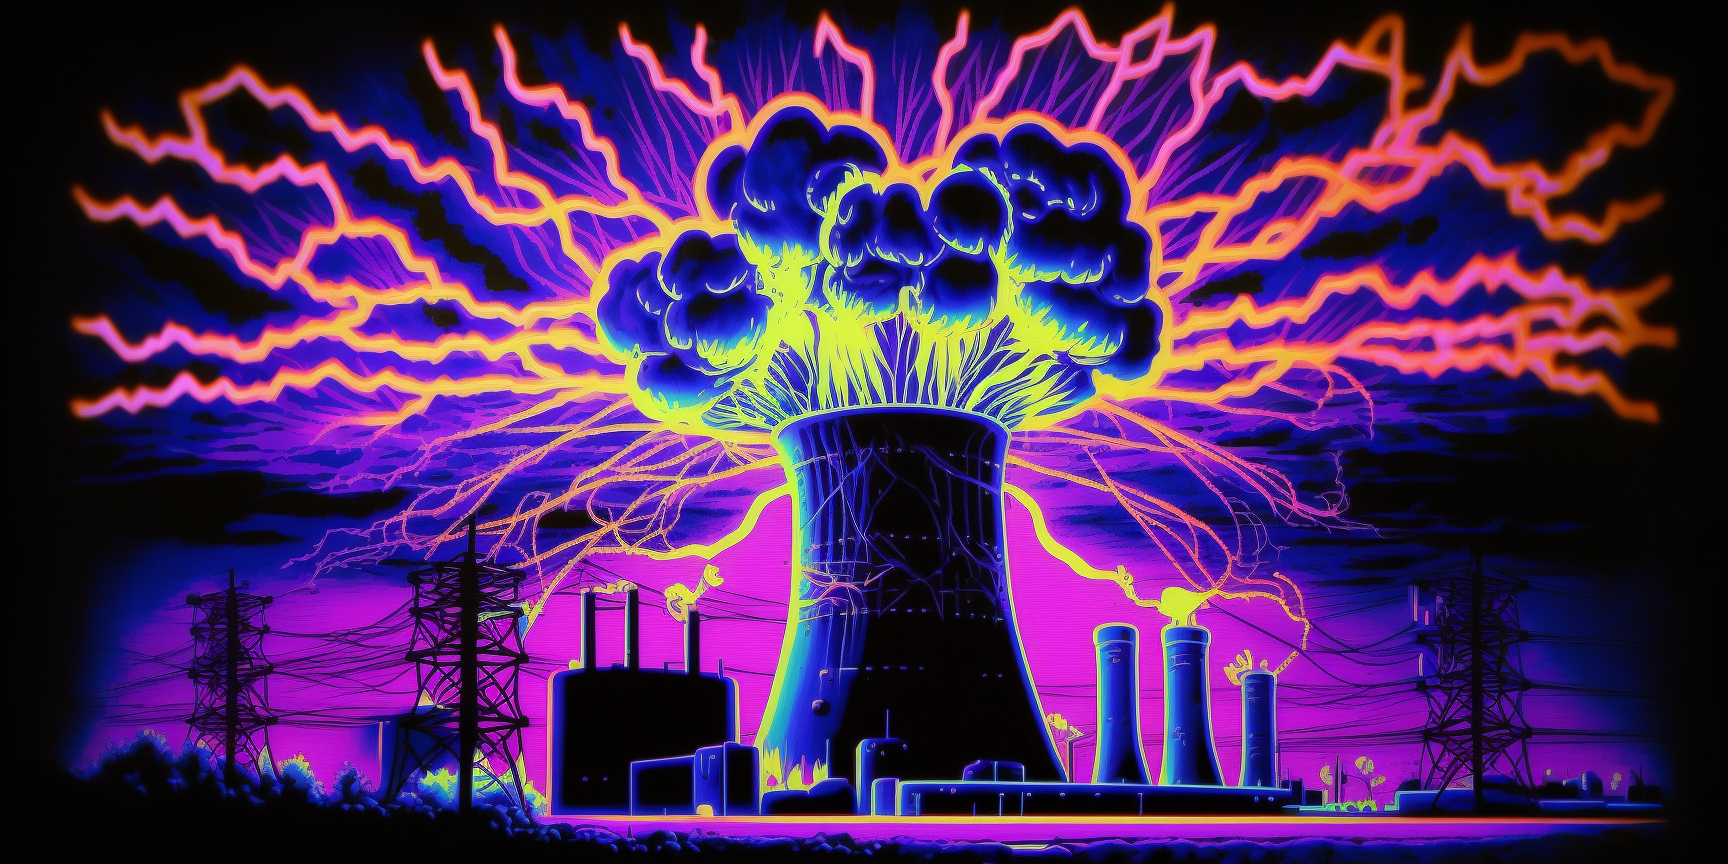 explosion at nuclear power plant